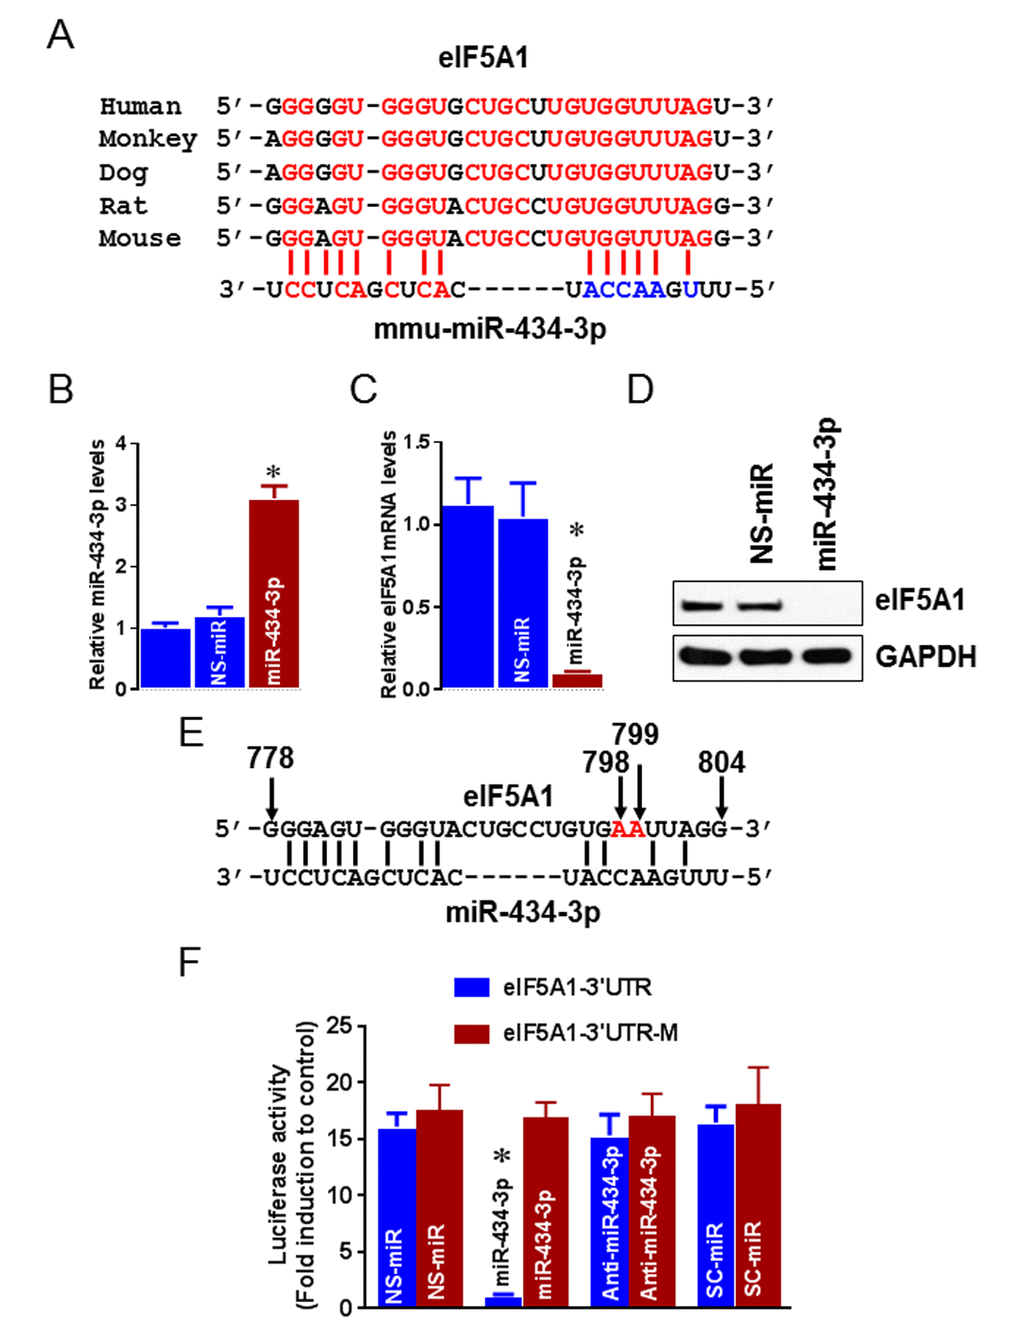 eIF5A1 is a target mRNA of miR-434-3p. (A) Sequence alignment of putative miR-434-3p targeting site in the 3’-UTR of eIF5A1 shows high levels of complementarity. (B-D) Myotubes were transfected with miR-434-3p mimetic or NS-mimetic. miR-434-3p overexpression was determined by qPCR assay (B). U6 served as a normalizer. eIF5A1 mRNA levels were analyzed 24 h after transfection by qPCR (C) and eIF5A1 protein levels were analyzed 36 h after transfection by Western blot (D). (E) Sequence information represents the site directed mutagenesis on the 3’UTR of eIF5A1. Red letters indicate mutated nucleotide and arrows indicate nucleotide position. (F) The eIF5A1 3’-UTR–luciferase construct or eIF5A1 3’-UTR mutated–luciferase construct were co-transfected with NS-mimetic, miR-434-3p mimetic, miR-434-3p antagomir or SC-miR. Forty-eight hours after transfection, cells were collected, and then firefly luciferase activities were estimated and normalized to Renilla luciferase activities. Each bar indicates mean ± SEM (n = 3). *P 